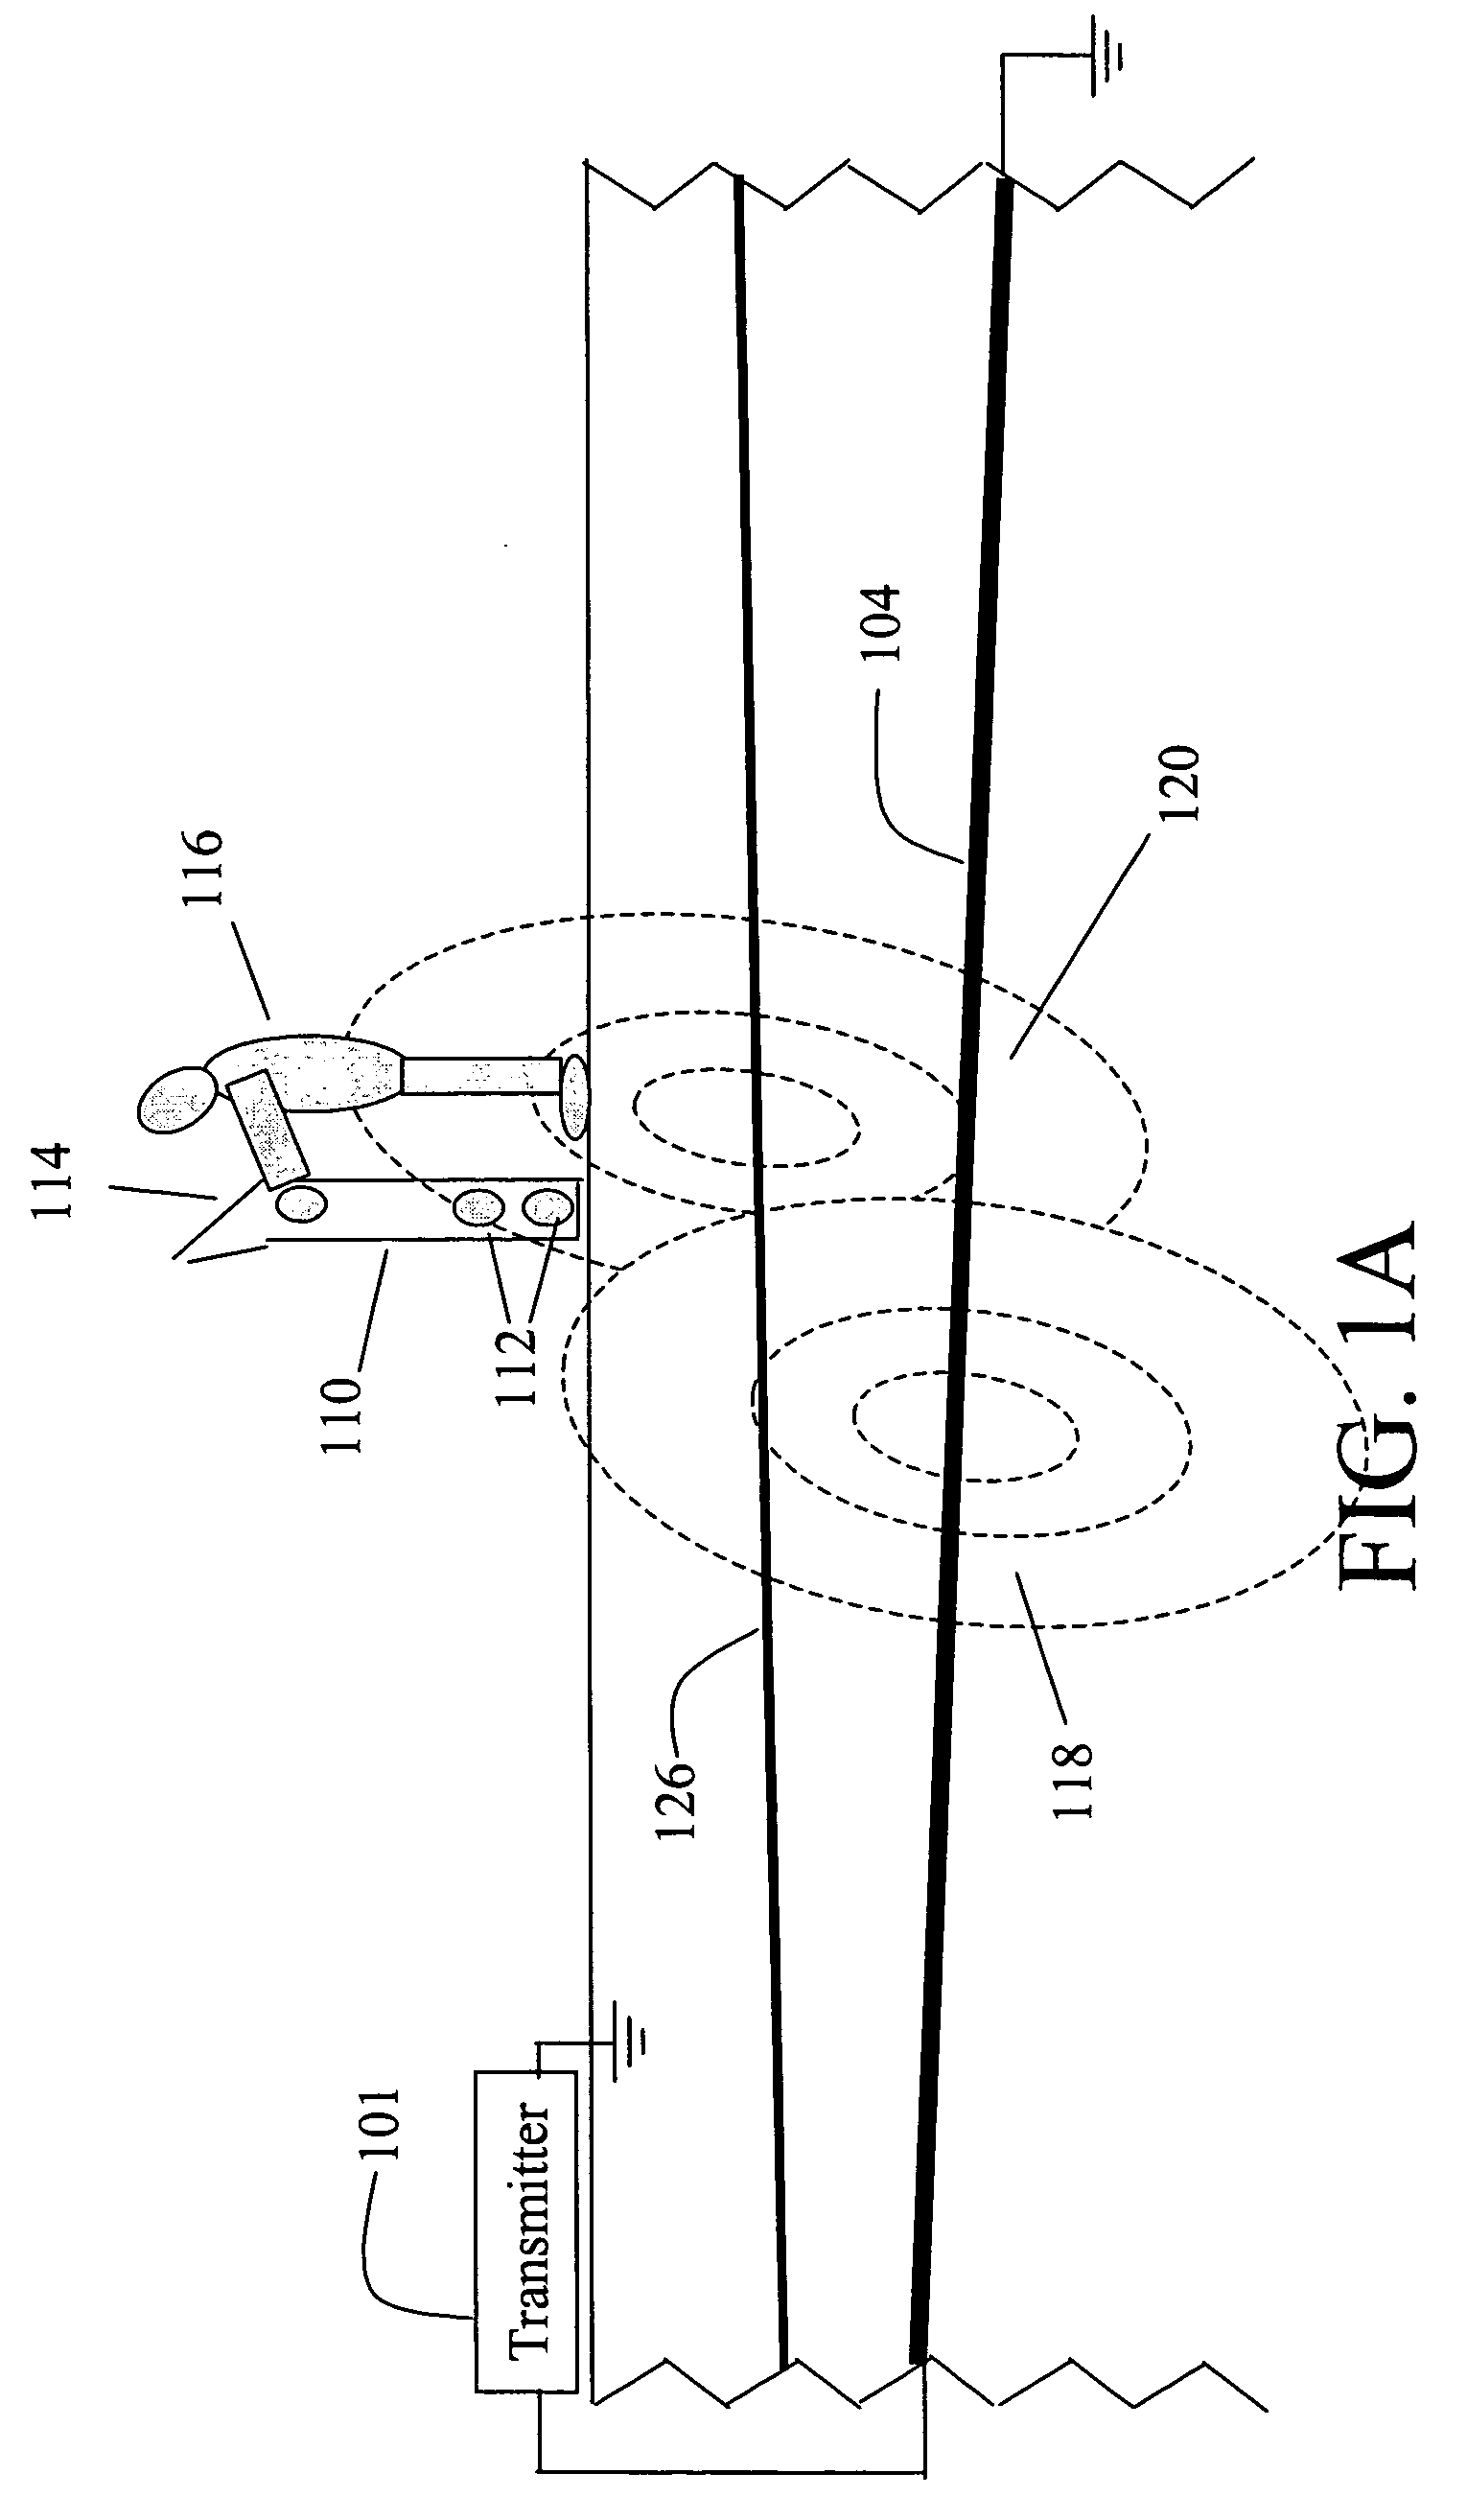 Method for decoupling interference due to bleedover in metallic pipe and cable locators